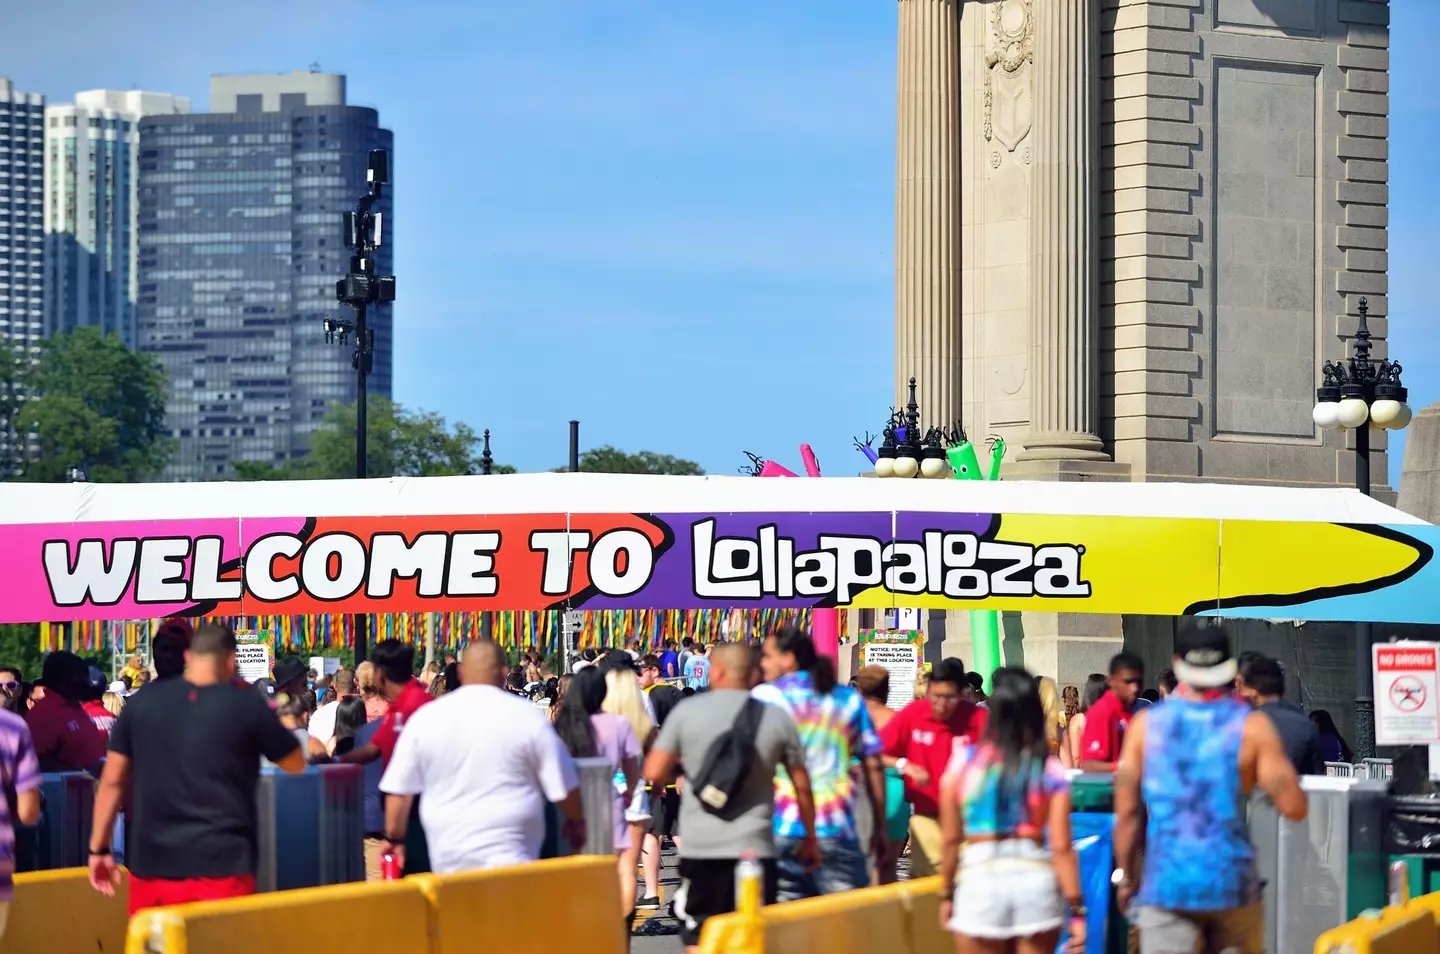 The false mass shooting threat was allegedly called in at Lollapalooza in Chicago.